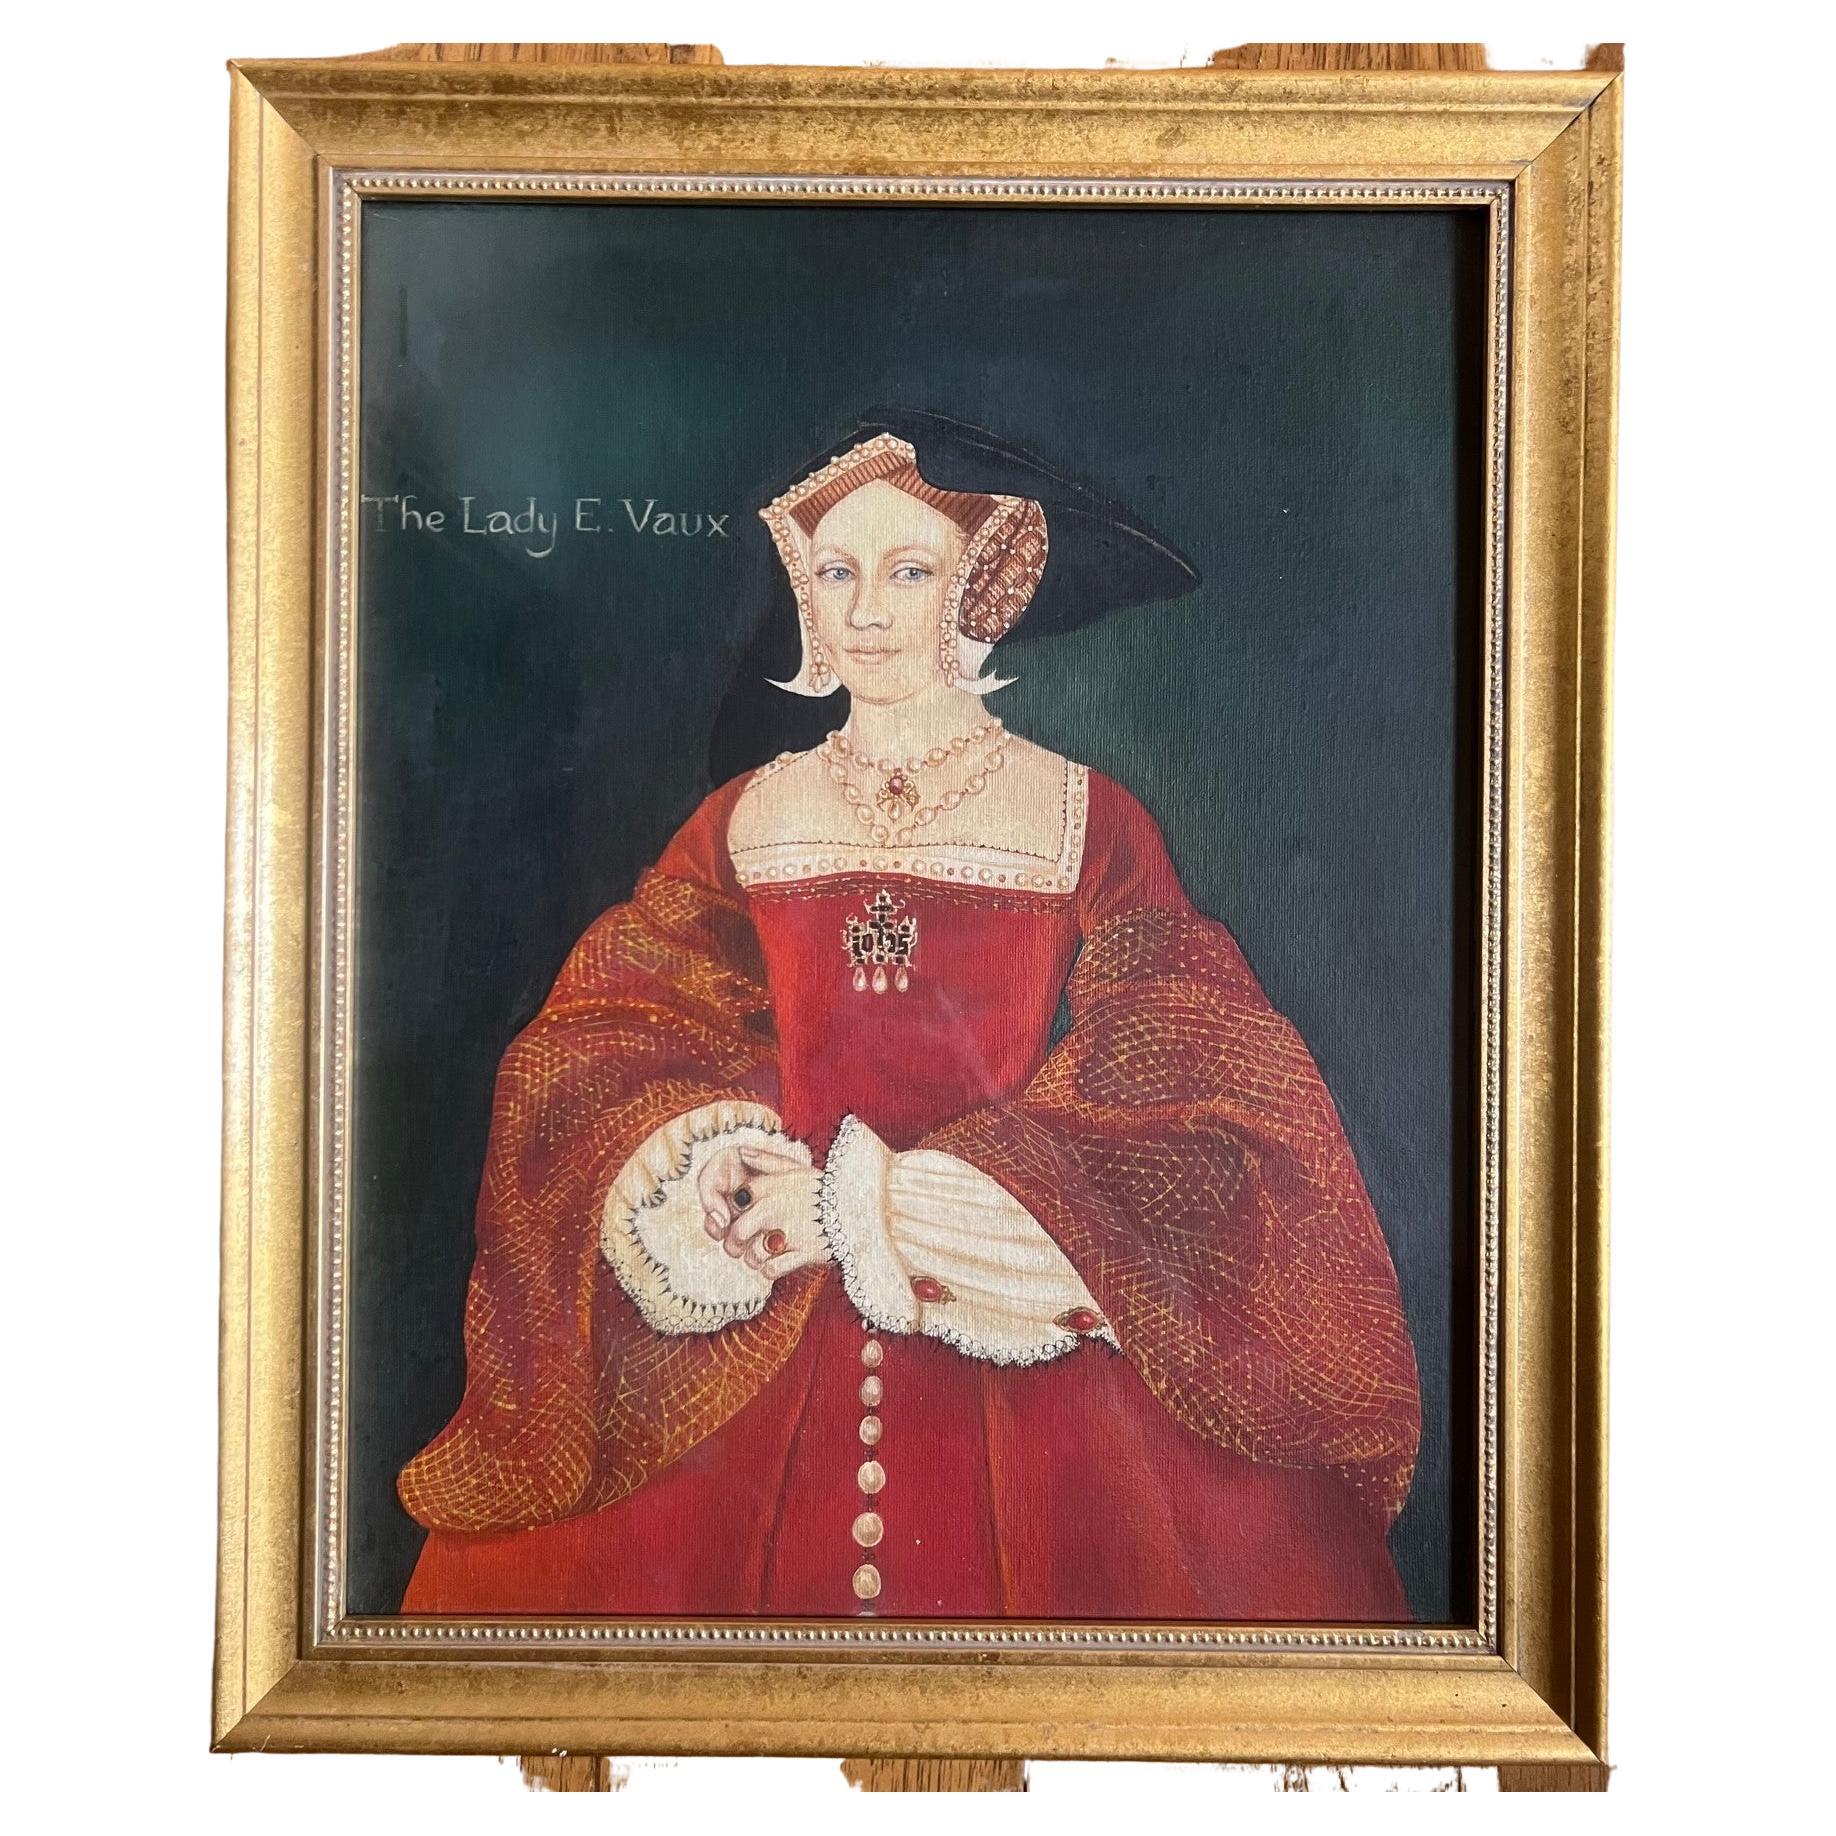 20th century artist rendition of a portrait of The Lady Elizabeth Vaux. 

Her portrait was thought to have been originally painted in 1535 by Hans Holbein the Younger which is now lost, though a preparatory drawing exists in the Royal Collection.